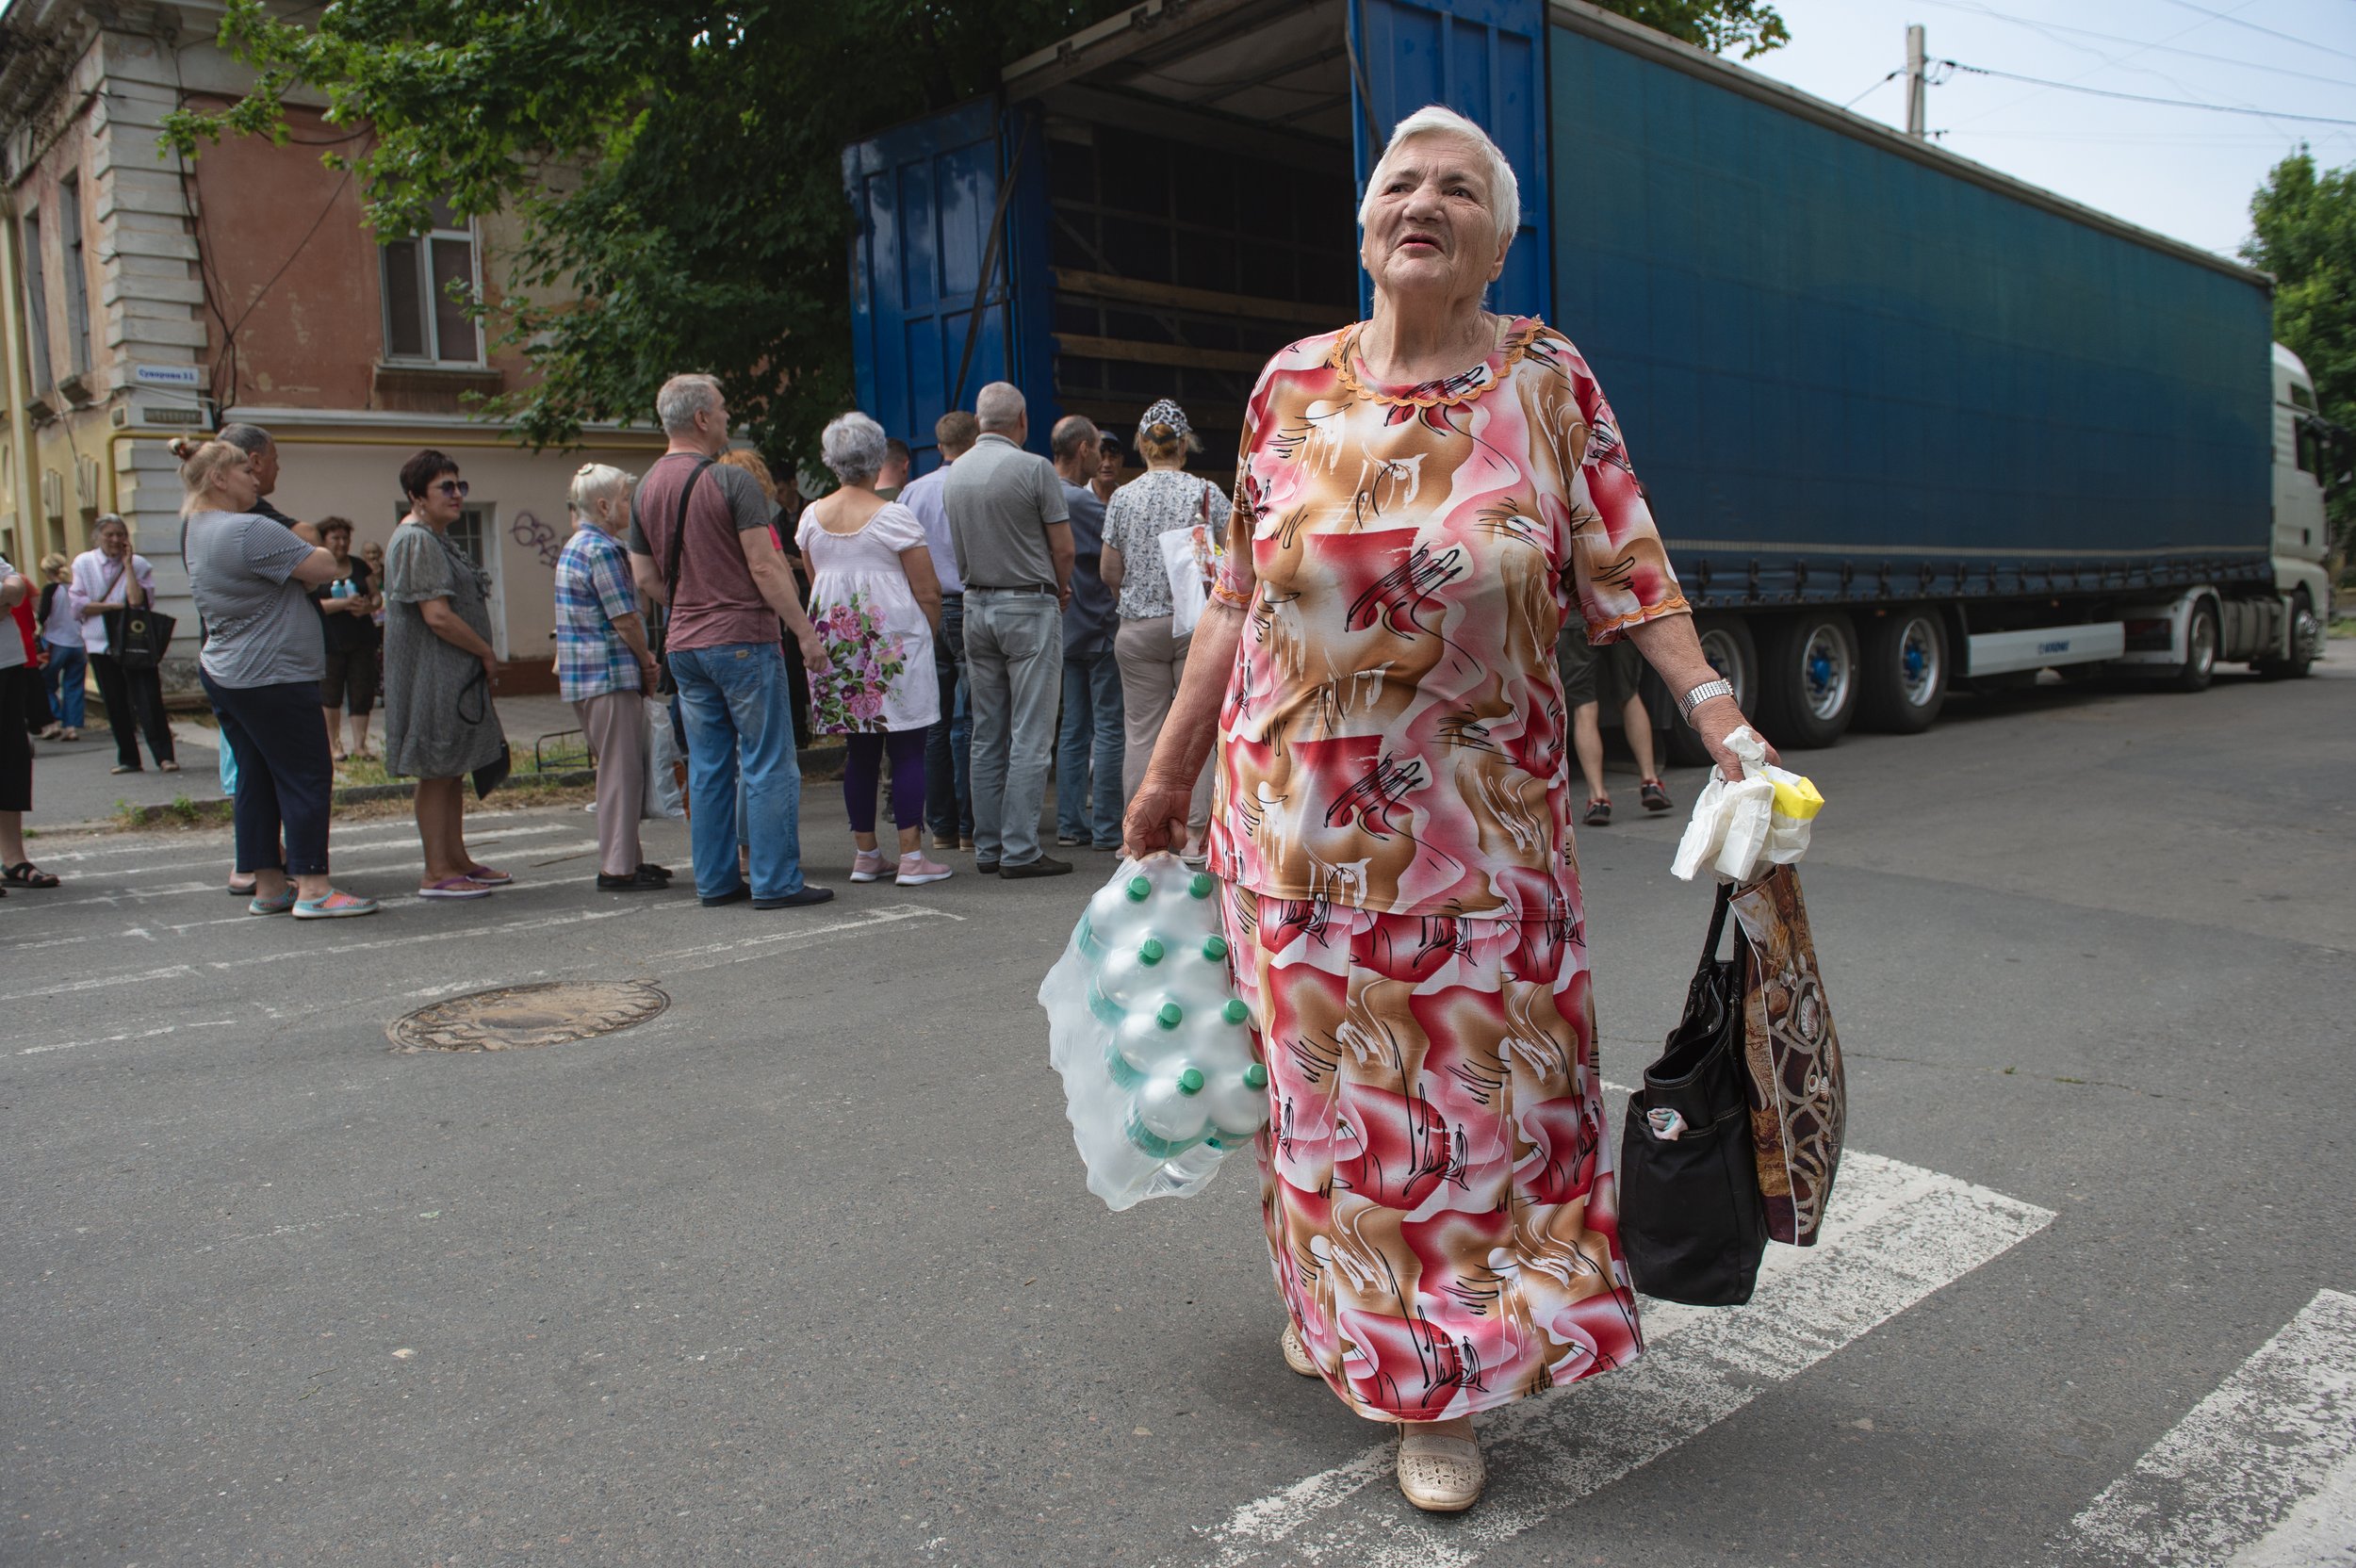  A woman holding bottled water and food listens to the sound of artillery fire as Ukrainians line up to collect aid in Kherson, Ukraine on June 8, 2023. Kherson continues to see intense fighting as Ukrainian forces and Russian troops battle each othe